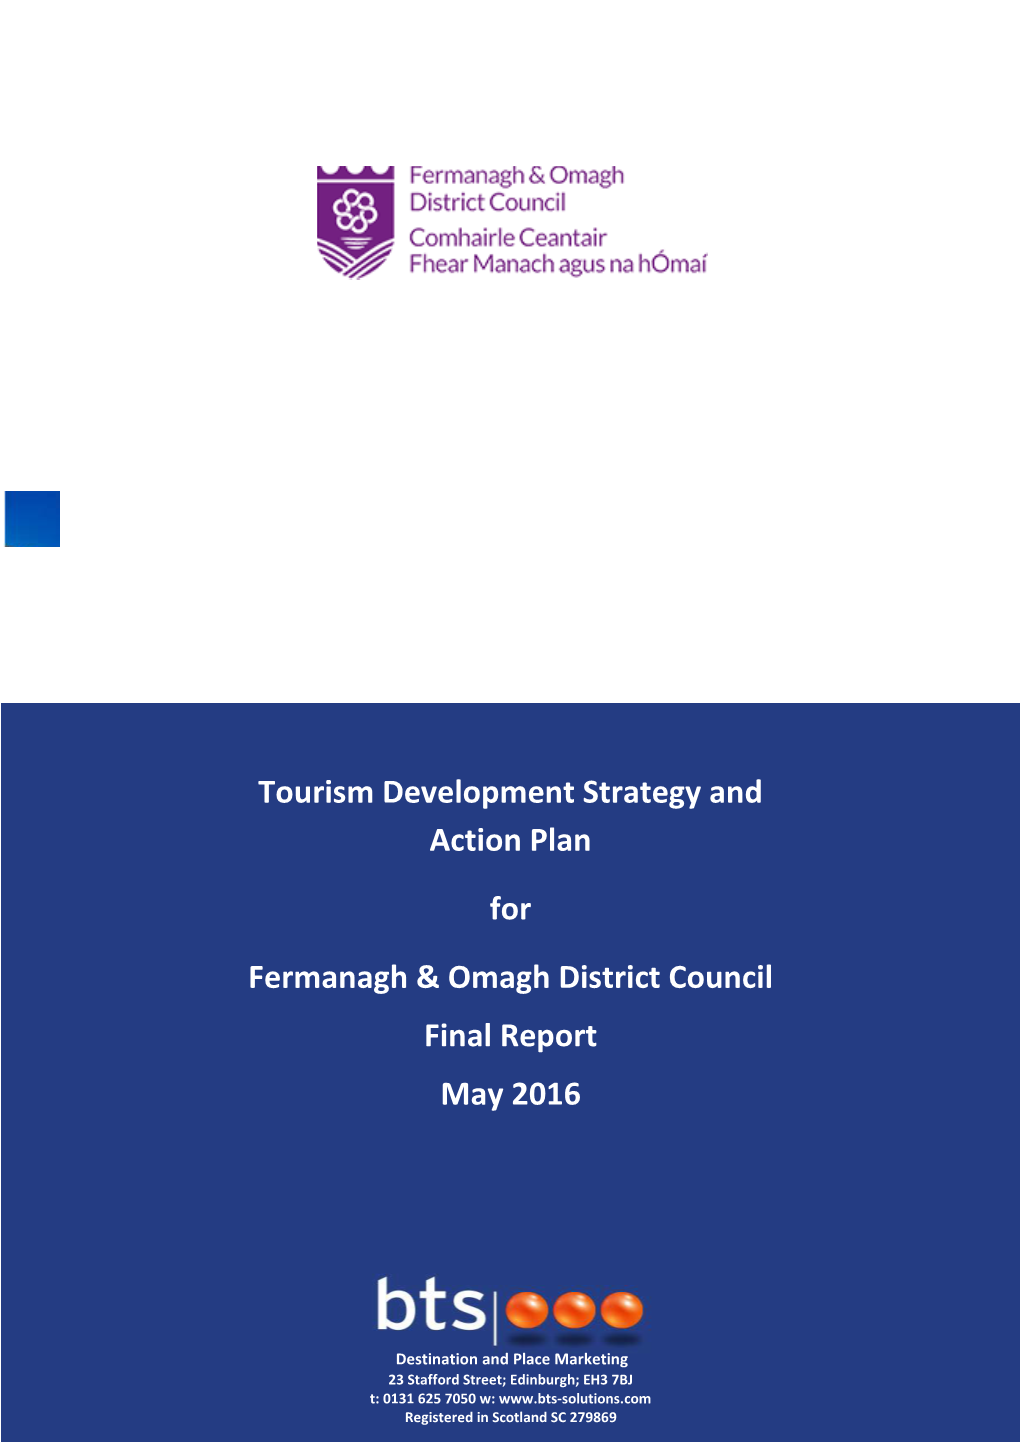 Tourism Development Strategy and Action Plan for Fermanagh & Omagh District Council Final Report May 2016